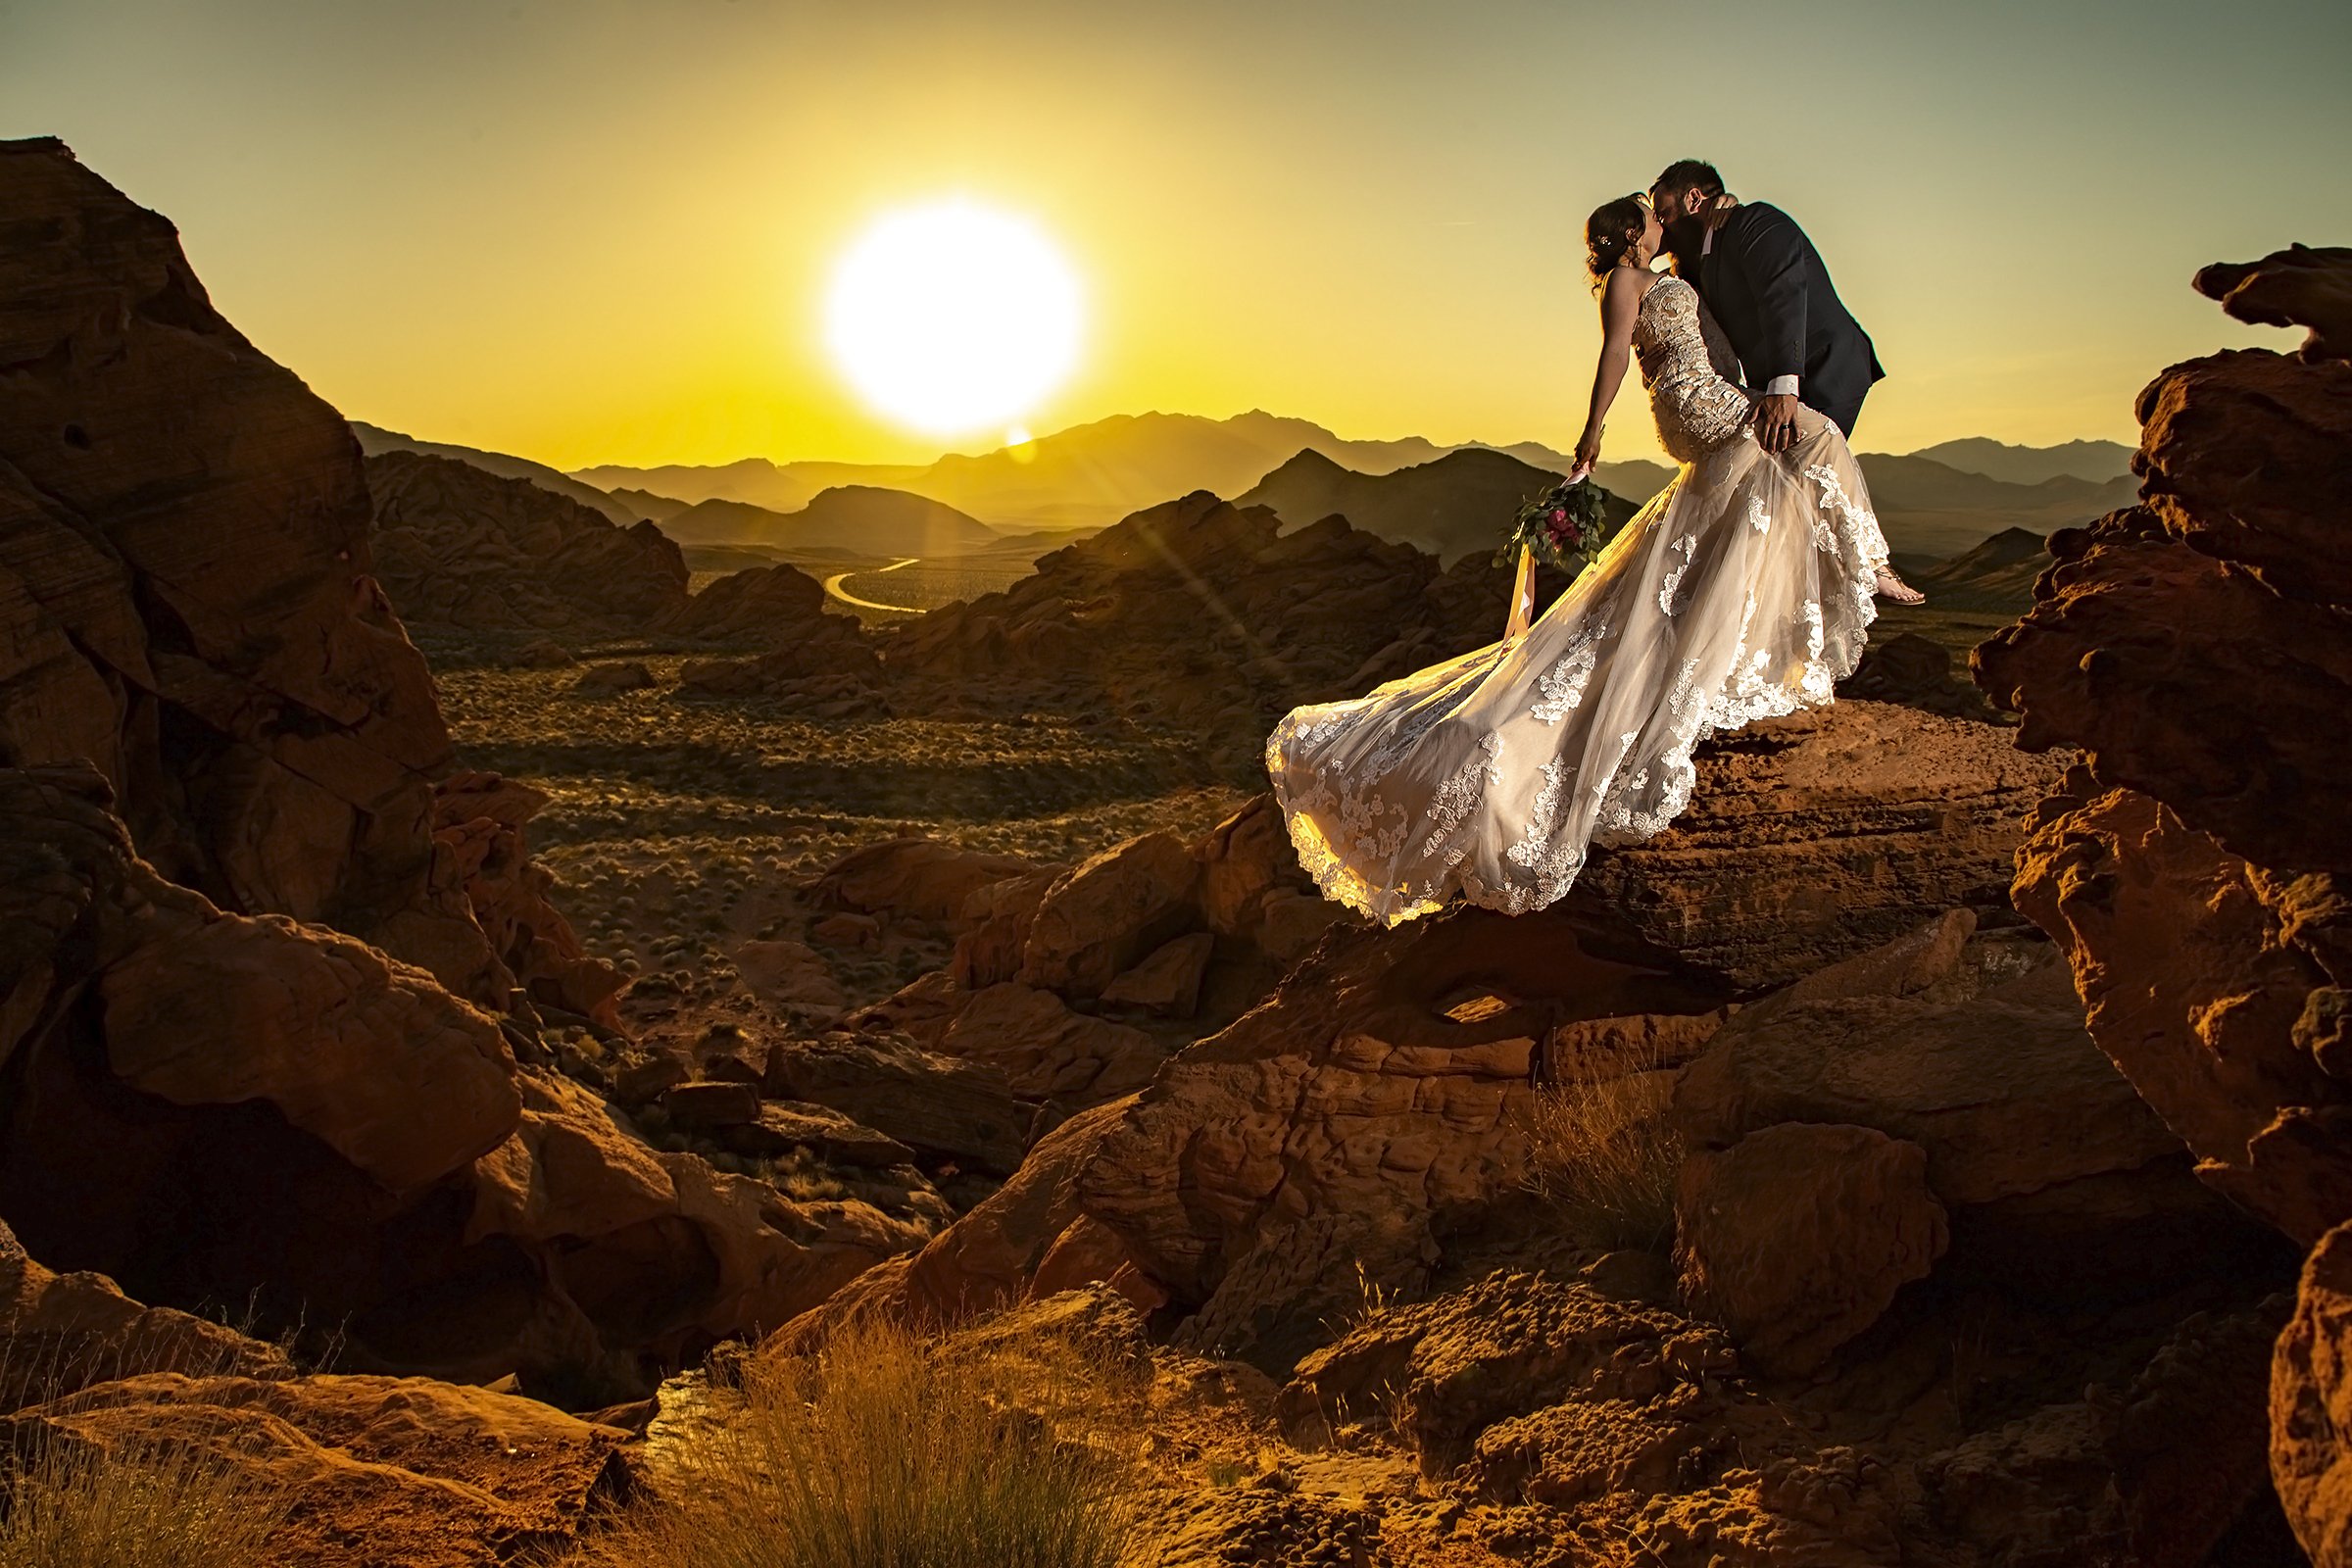 A couple passionately kisses during their scenic Las Vegas wedding at sunset in the desert.